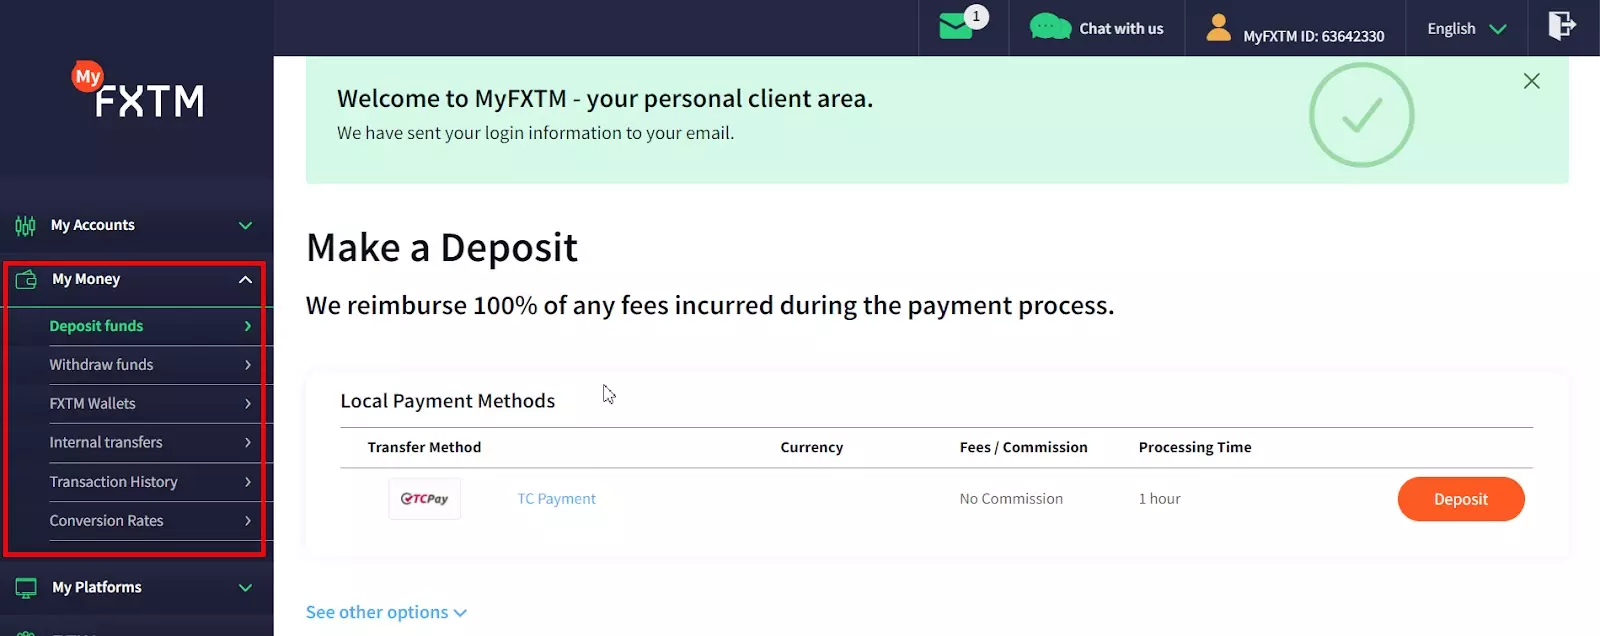 FXTM (Forex Time) Review - Deposits & Withdrawal